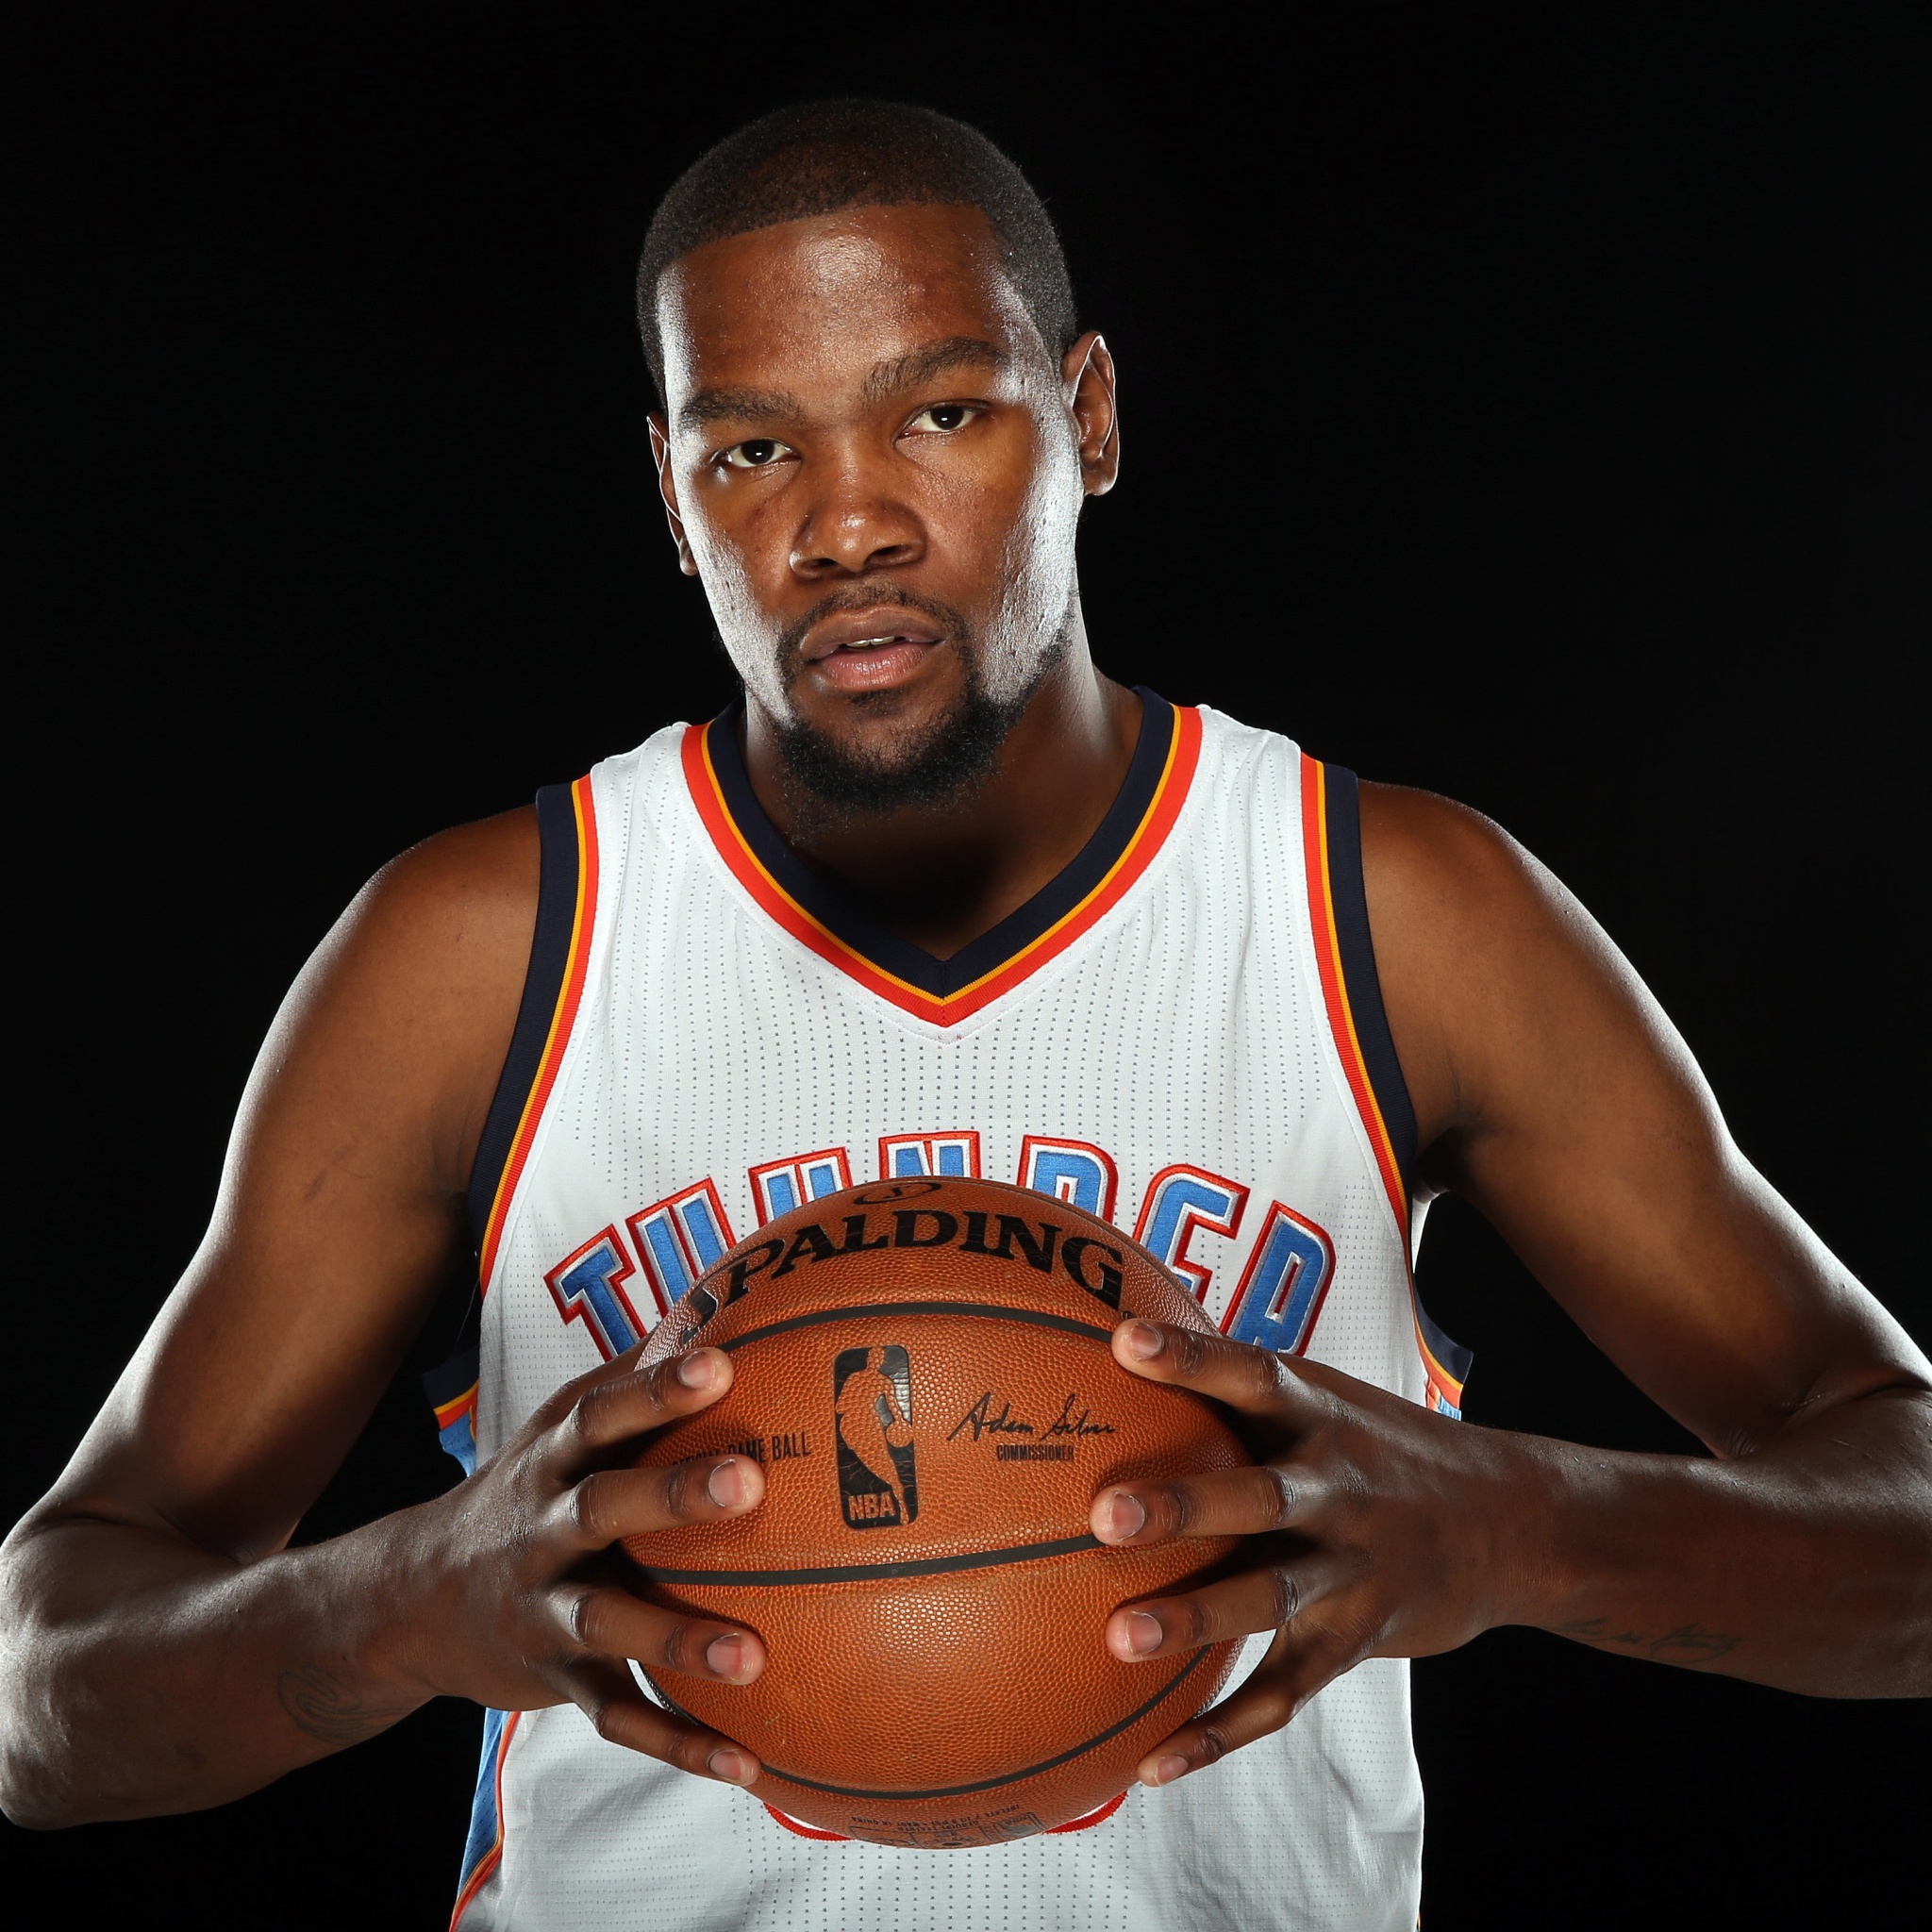 Phoenix Suns on Twitter WELCOME TO THE VALLEY KD   httpstco13PoF5obn2  Twitter